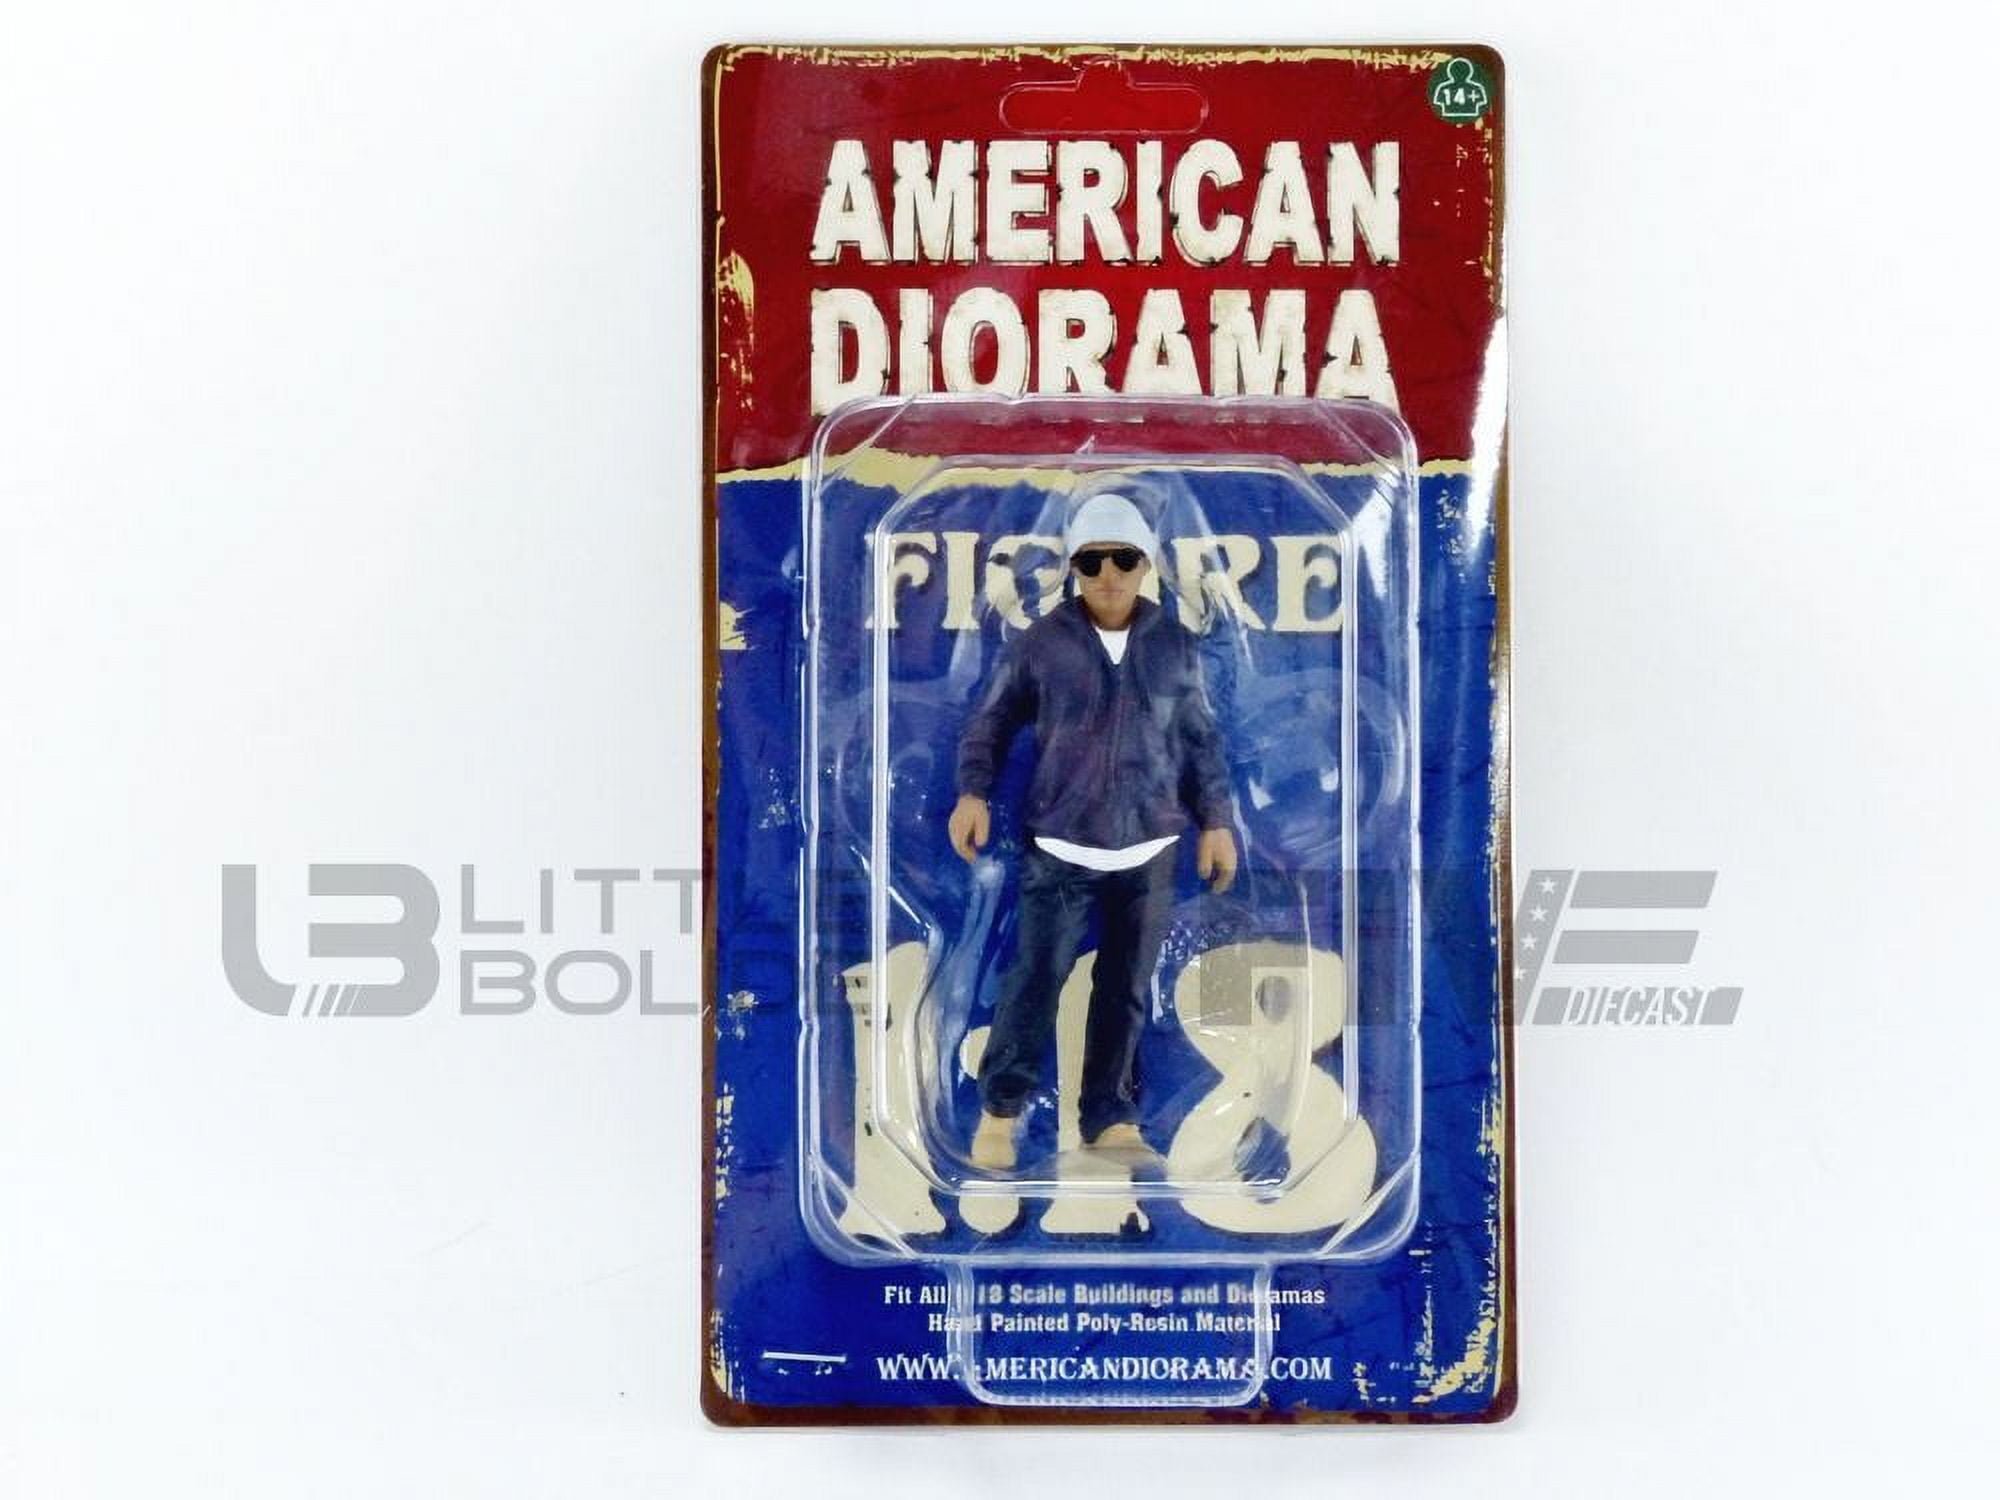 Picture of American Diorama 76280 1 in. Car Meet Figurine IV for 1 by 18 Scale Models, Navy